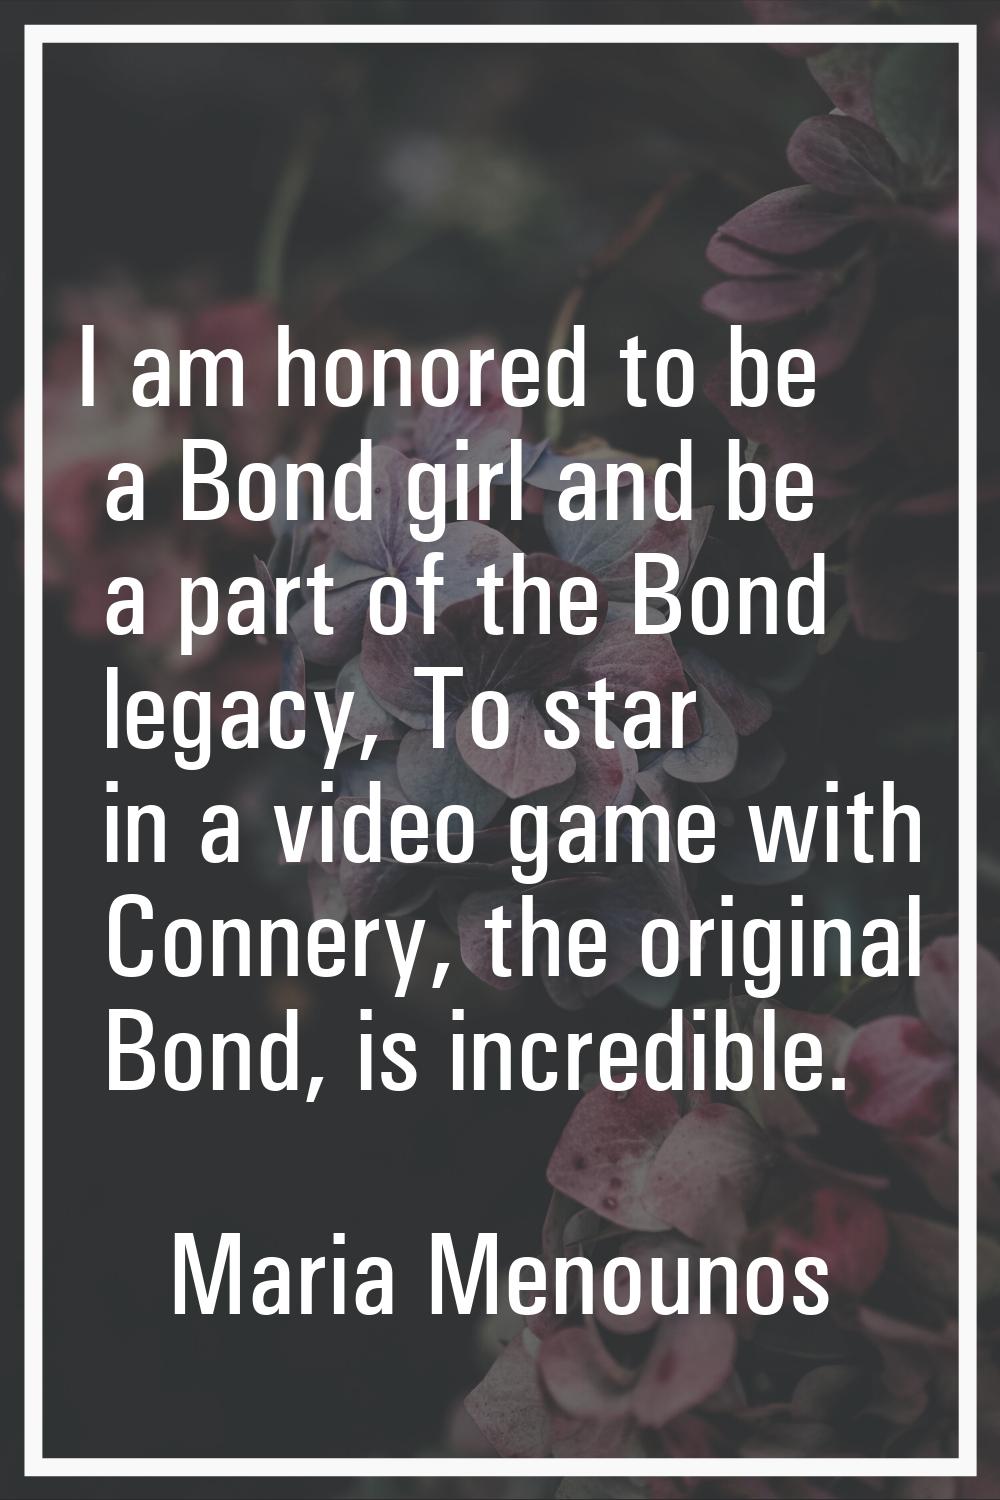 I am honored to be a Bond girl and be a part of the Bond legacy, To star in a video game with Conne